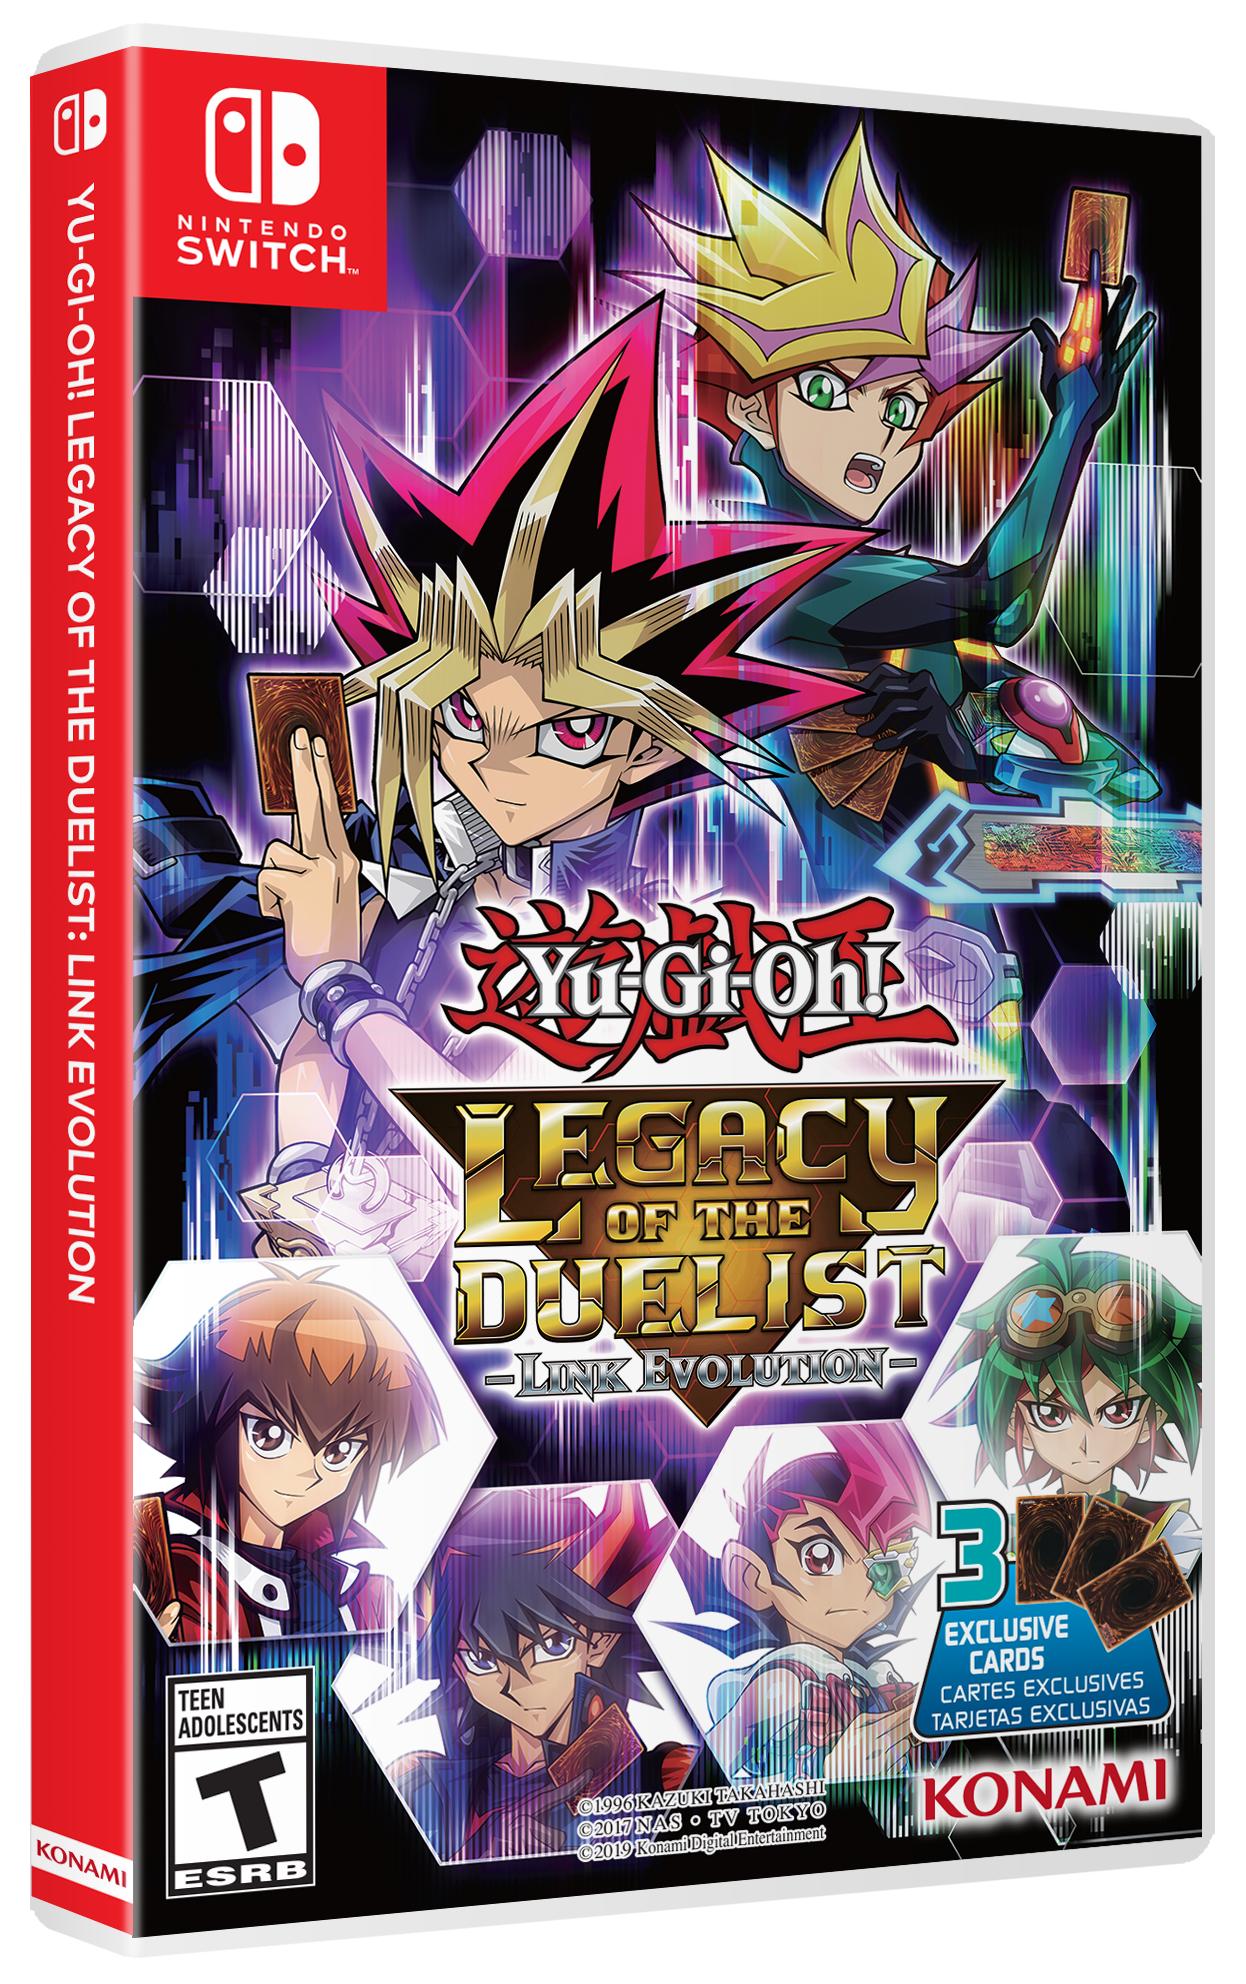 Konami on Twitter: "Yu-Gi-Oh! Legacy of the Duelist: Link Evolution Out Now  as a Nintendo Switch Exclusive for $39.99! Digital or Physical + TCG cards,  this game provides the opportunity to relive